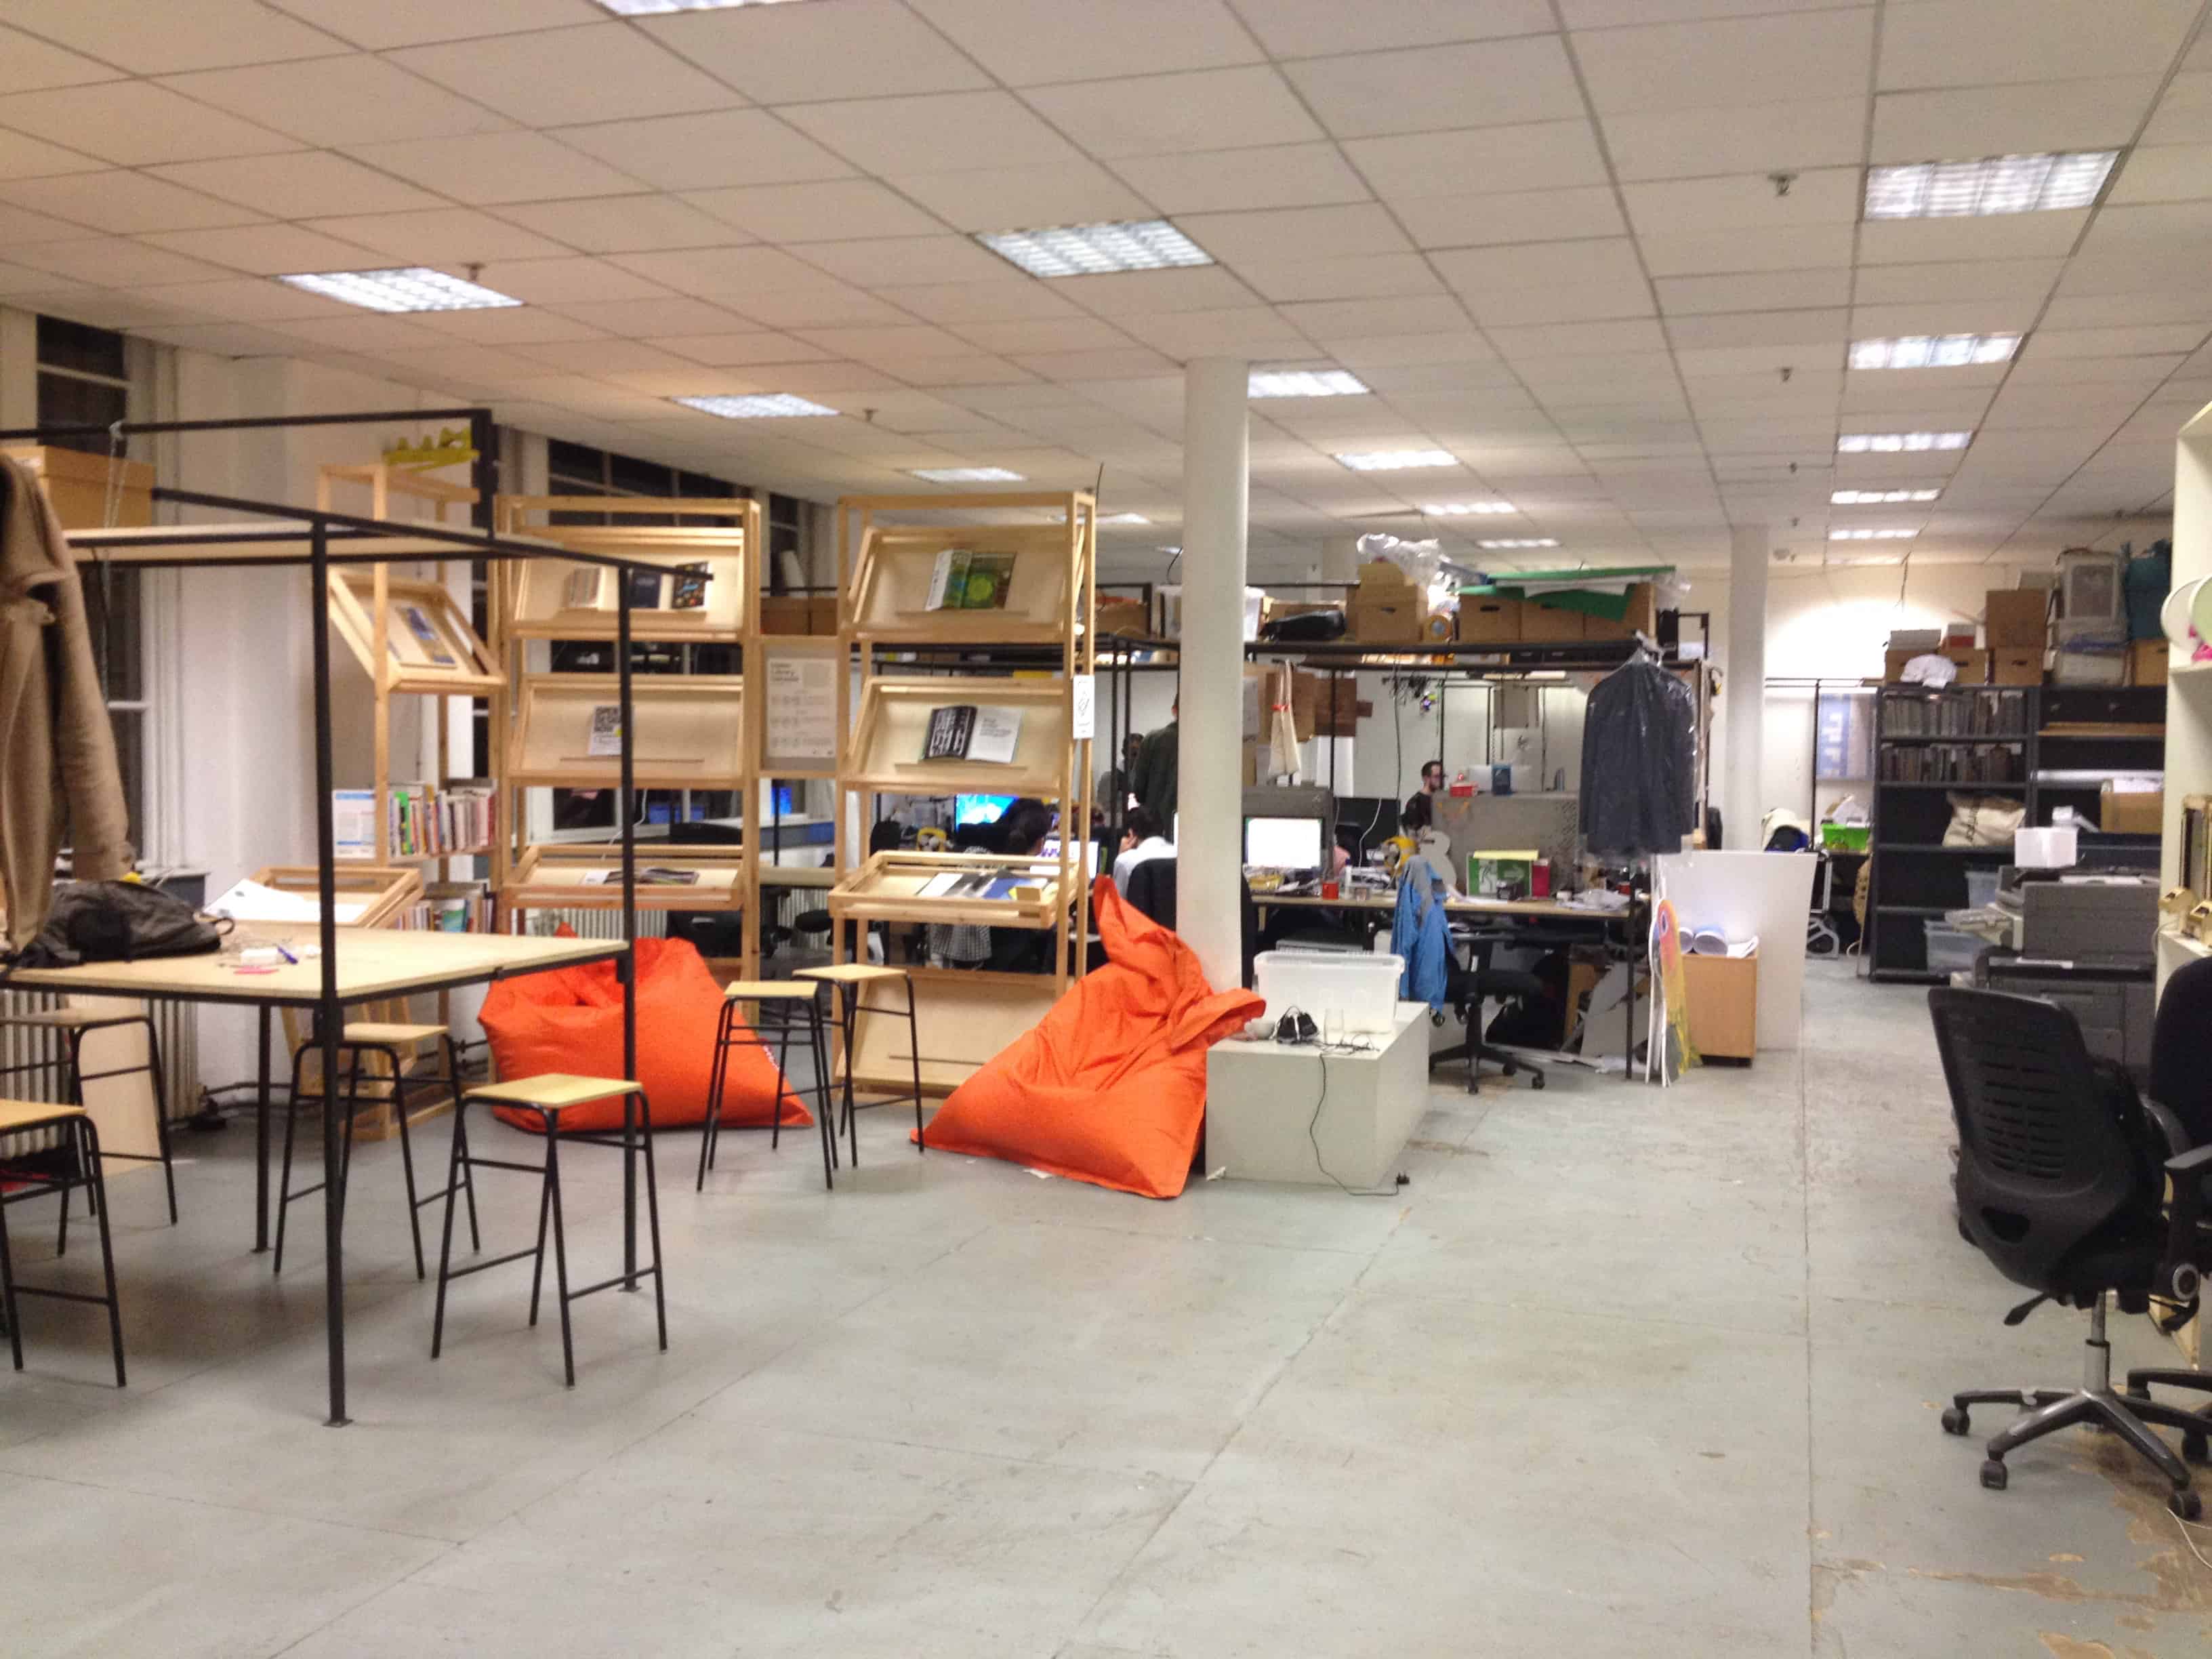 Maker spaces, like this one at London's Somerset Hpuse, provide companies with access to technologies they would otherwise not be ab to afford.